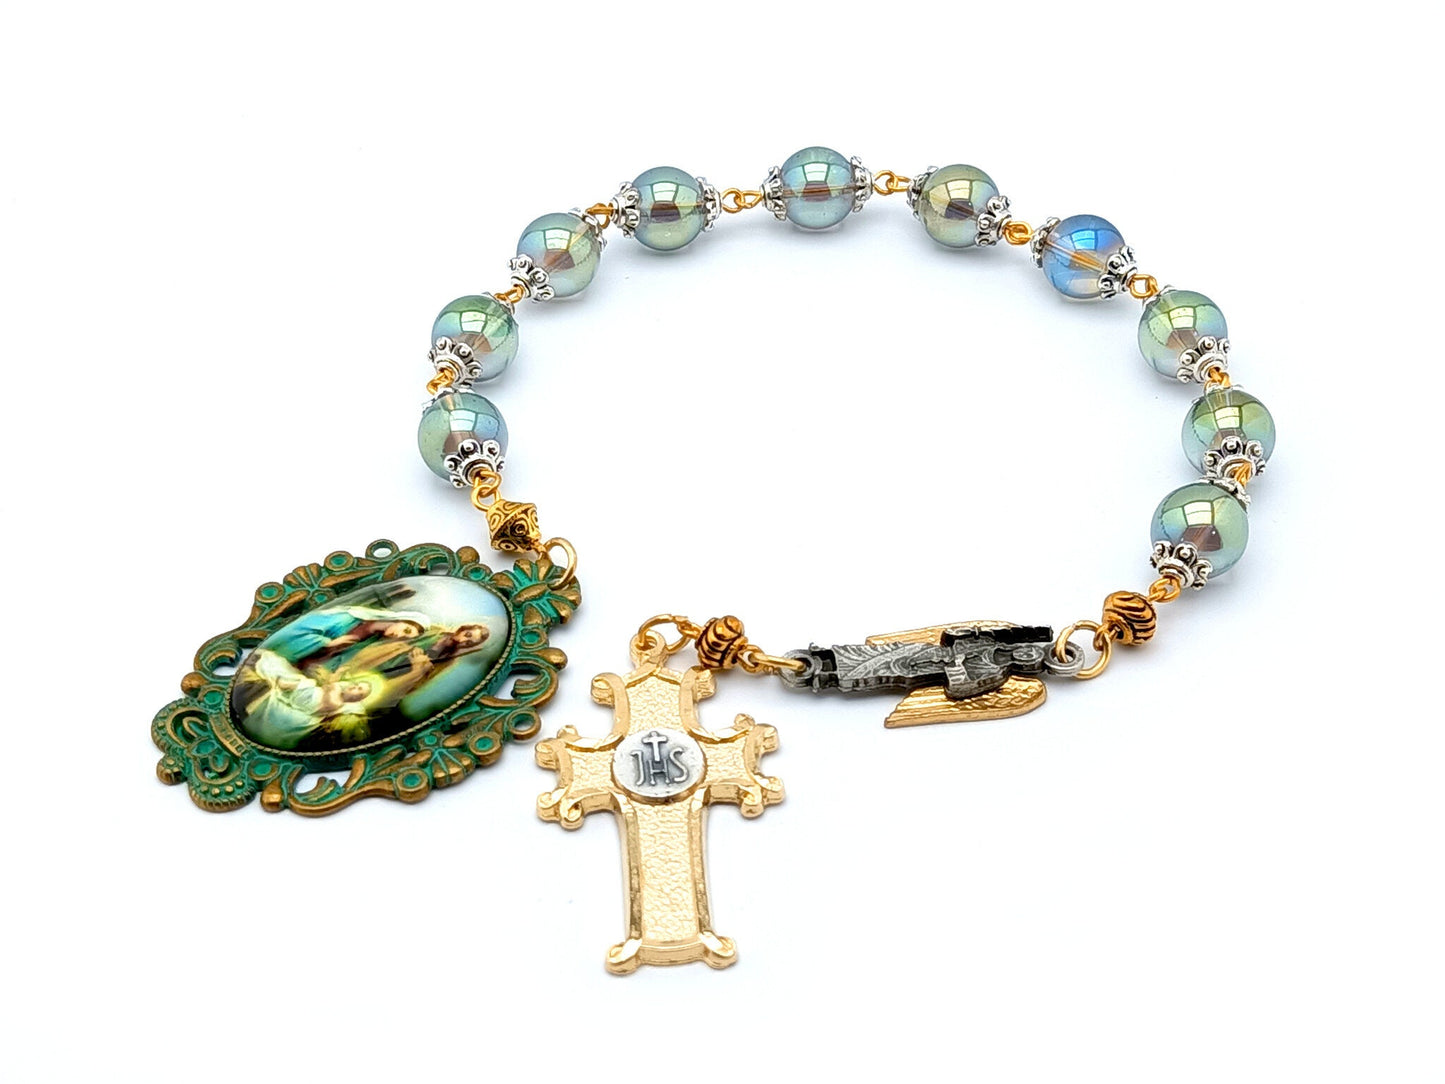 Holy Family unique rosary beads single decade rosary with green glass beads, gold plated cross and verdigris picture centre medal.